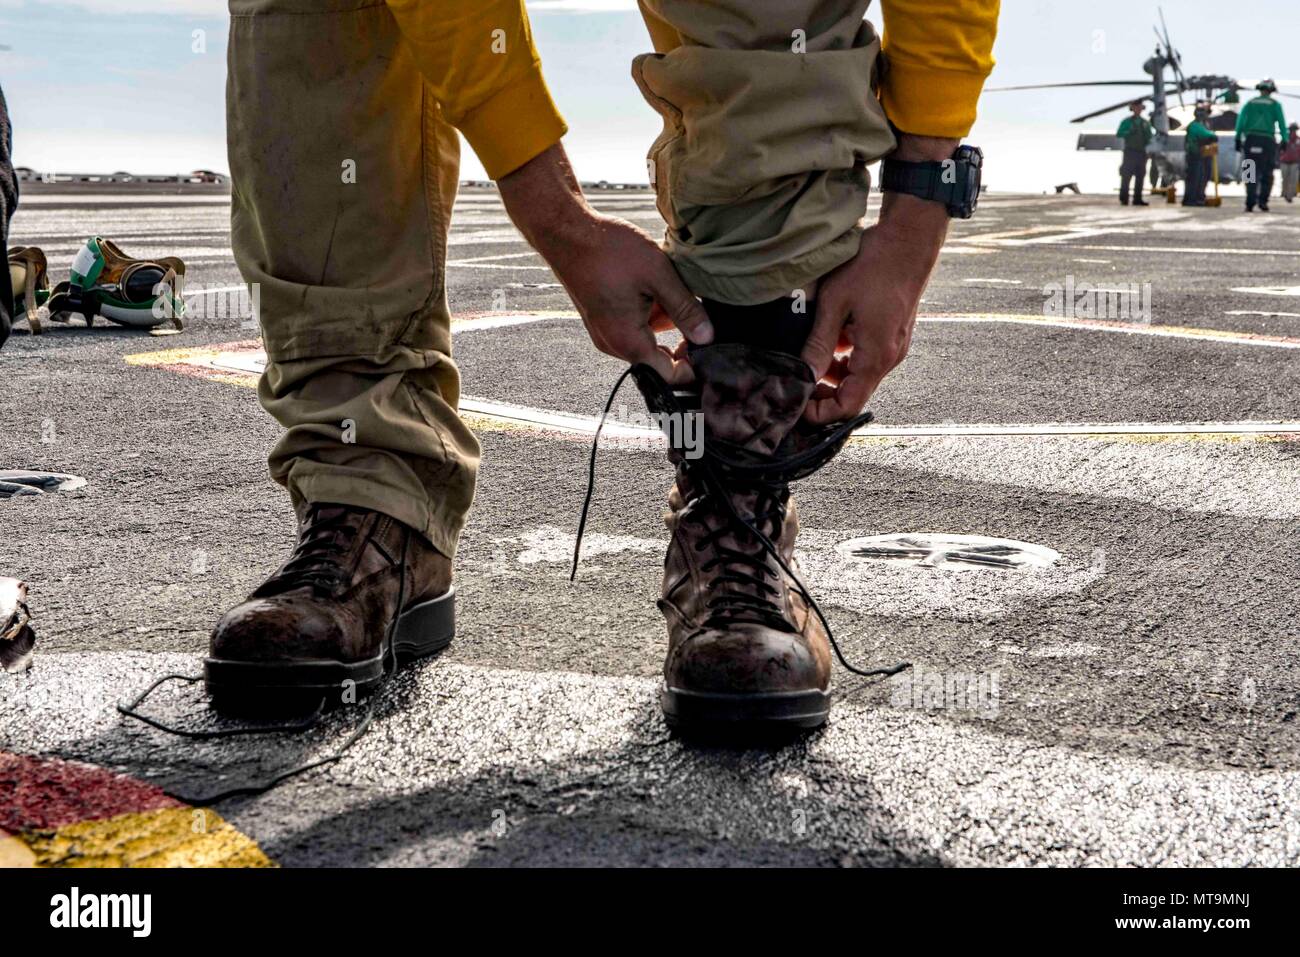 180517-N-UV609-0342 ATLANTIC OCEAN (May 17, 2018) Lt. Joshua Pritt, from  Newcastle, Delaware, removes his boots for a "boot shot" off the aircraft  carrier USS George H.W. Bush (CVN 77) to honor his